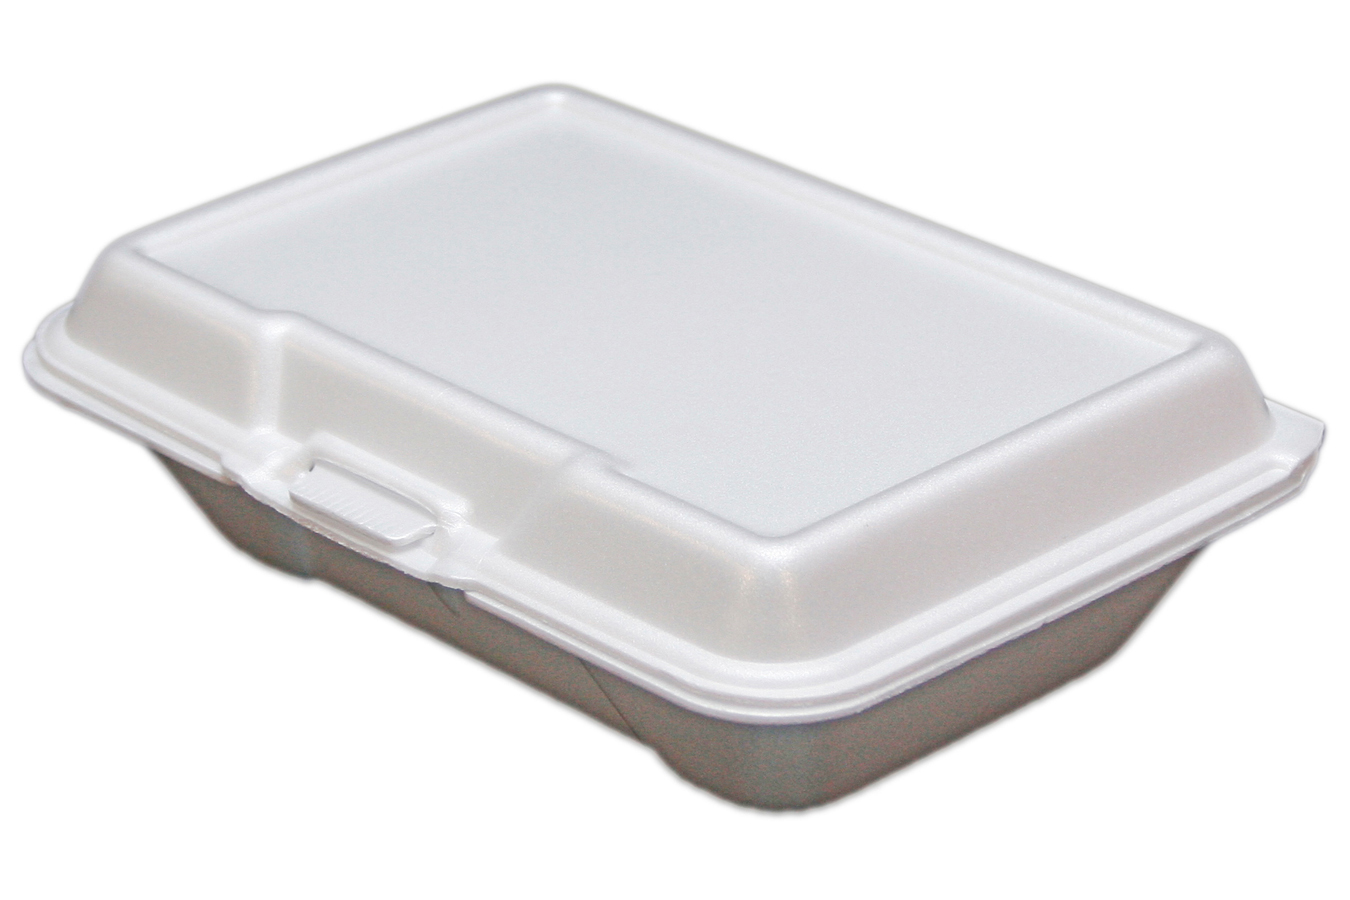 Ceres brand white non-vented hinged foam takeout disposable container